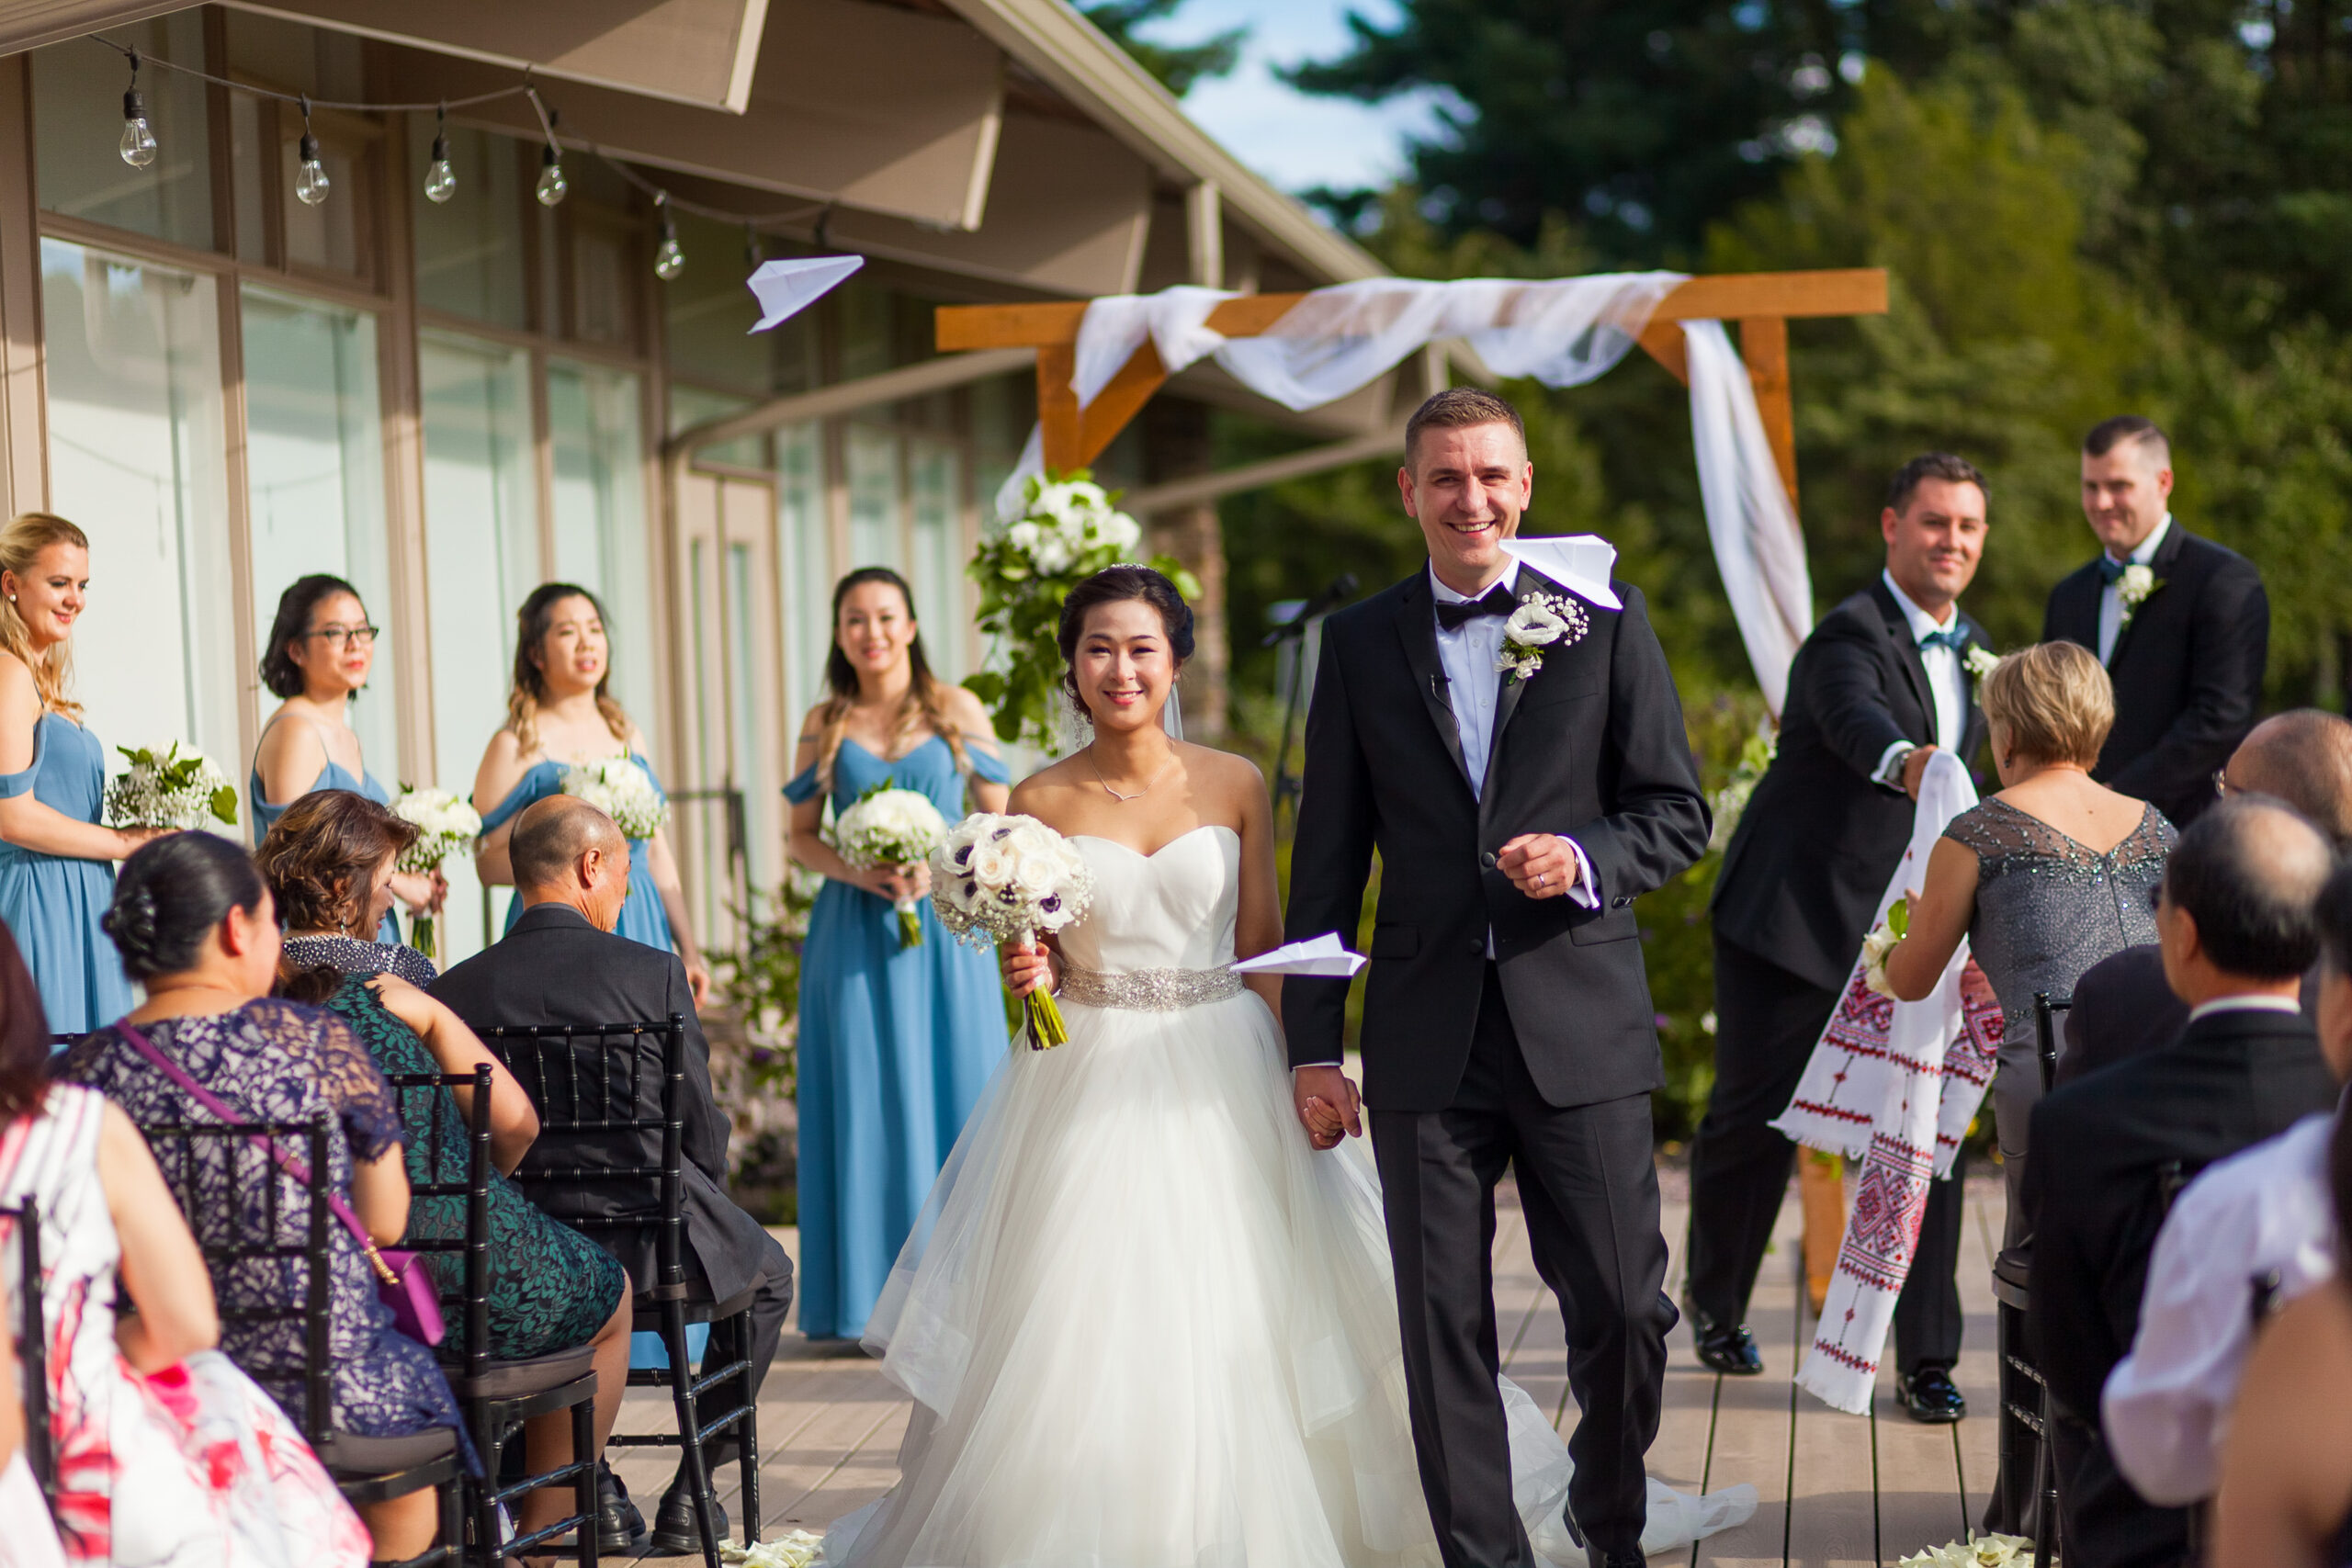 Chinese and Ukrainian Multicultural Wedding | So This Is Love